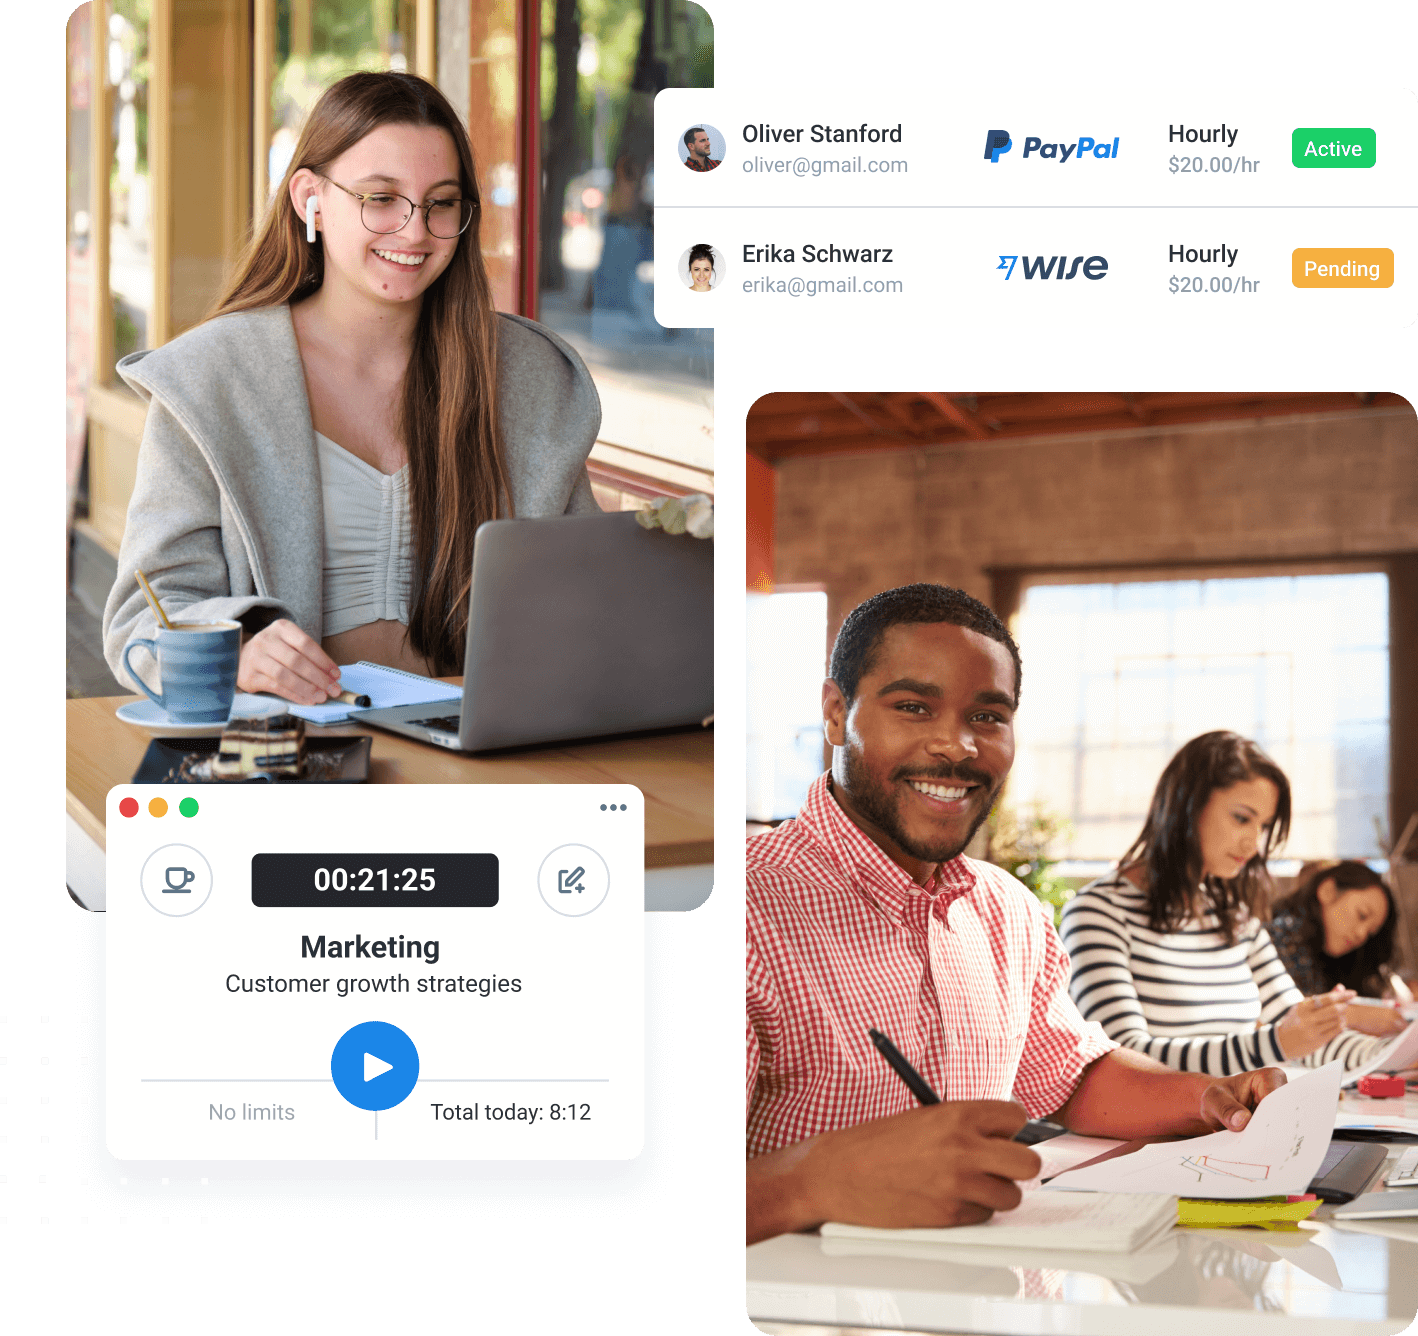 Hubstaff’s payroll integrations with PayPal, Wise, and more. 